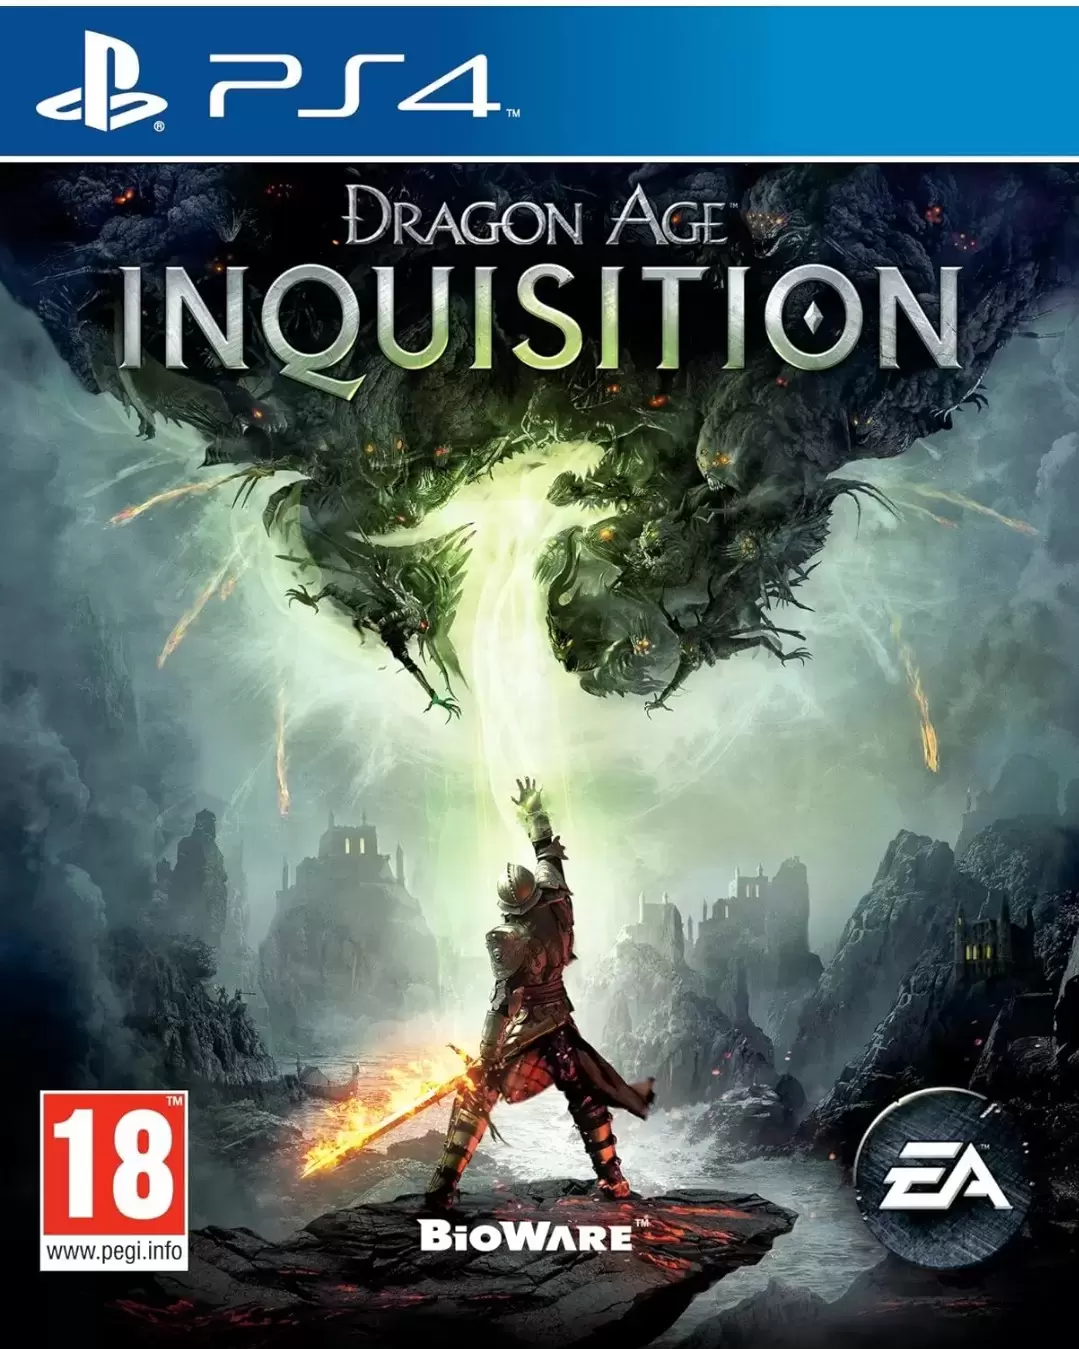 PS4 Games - Dragon Age Inquisition